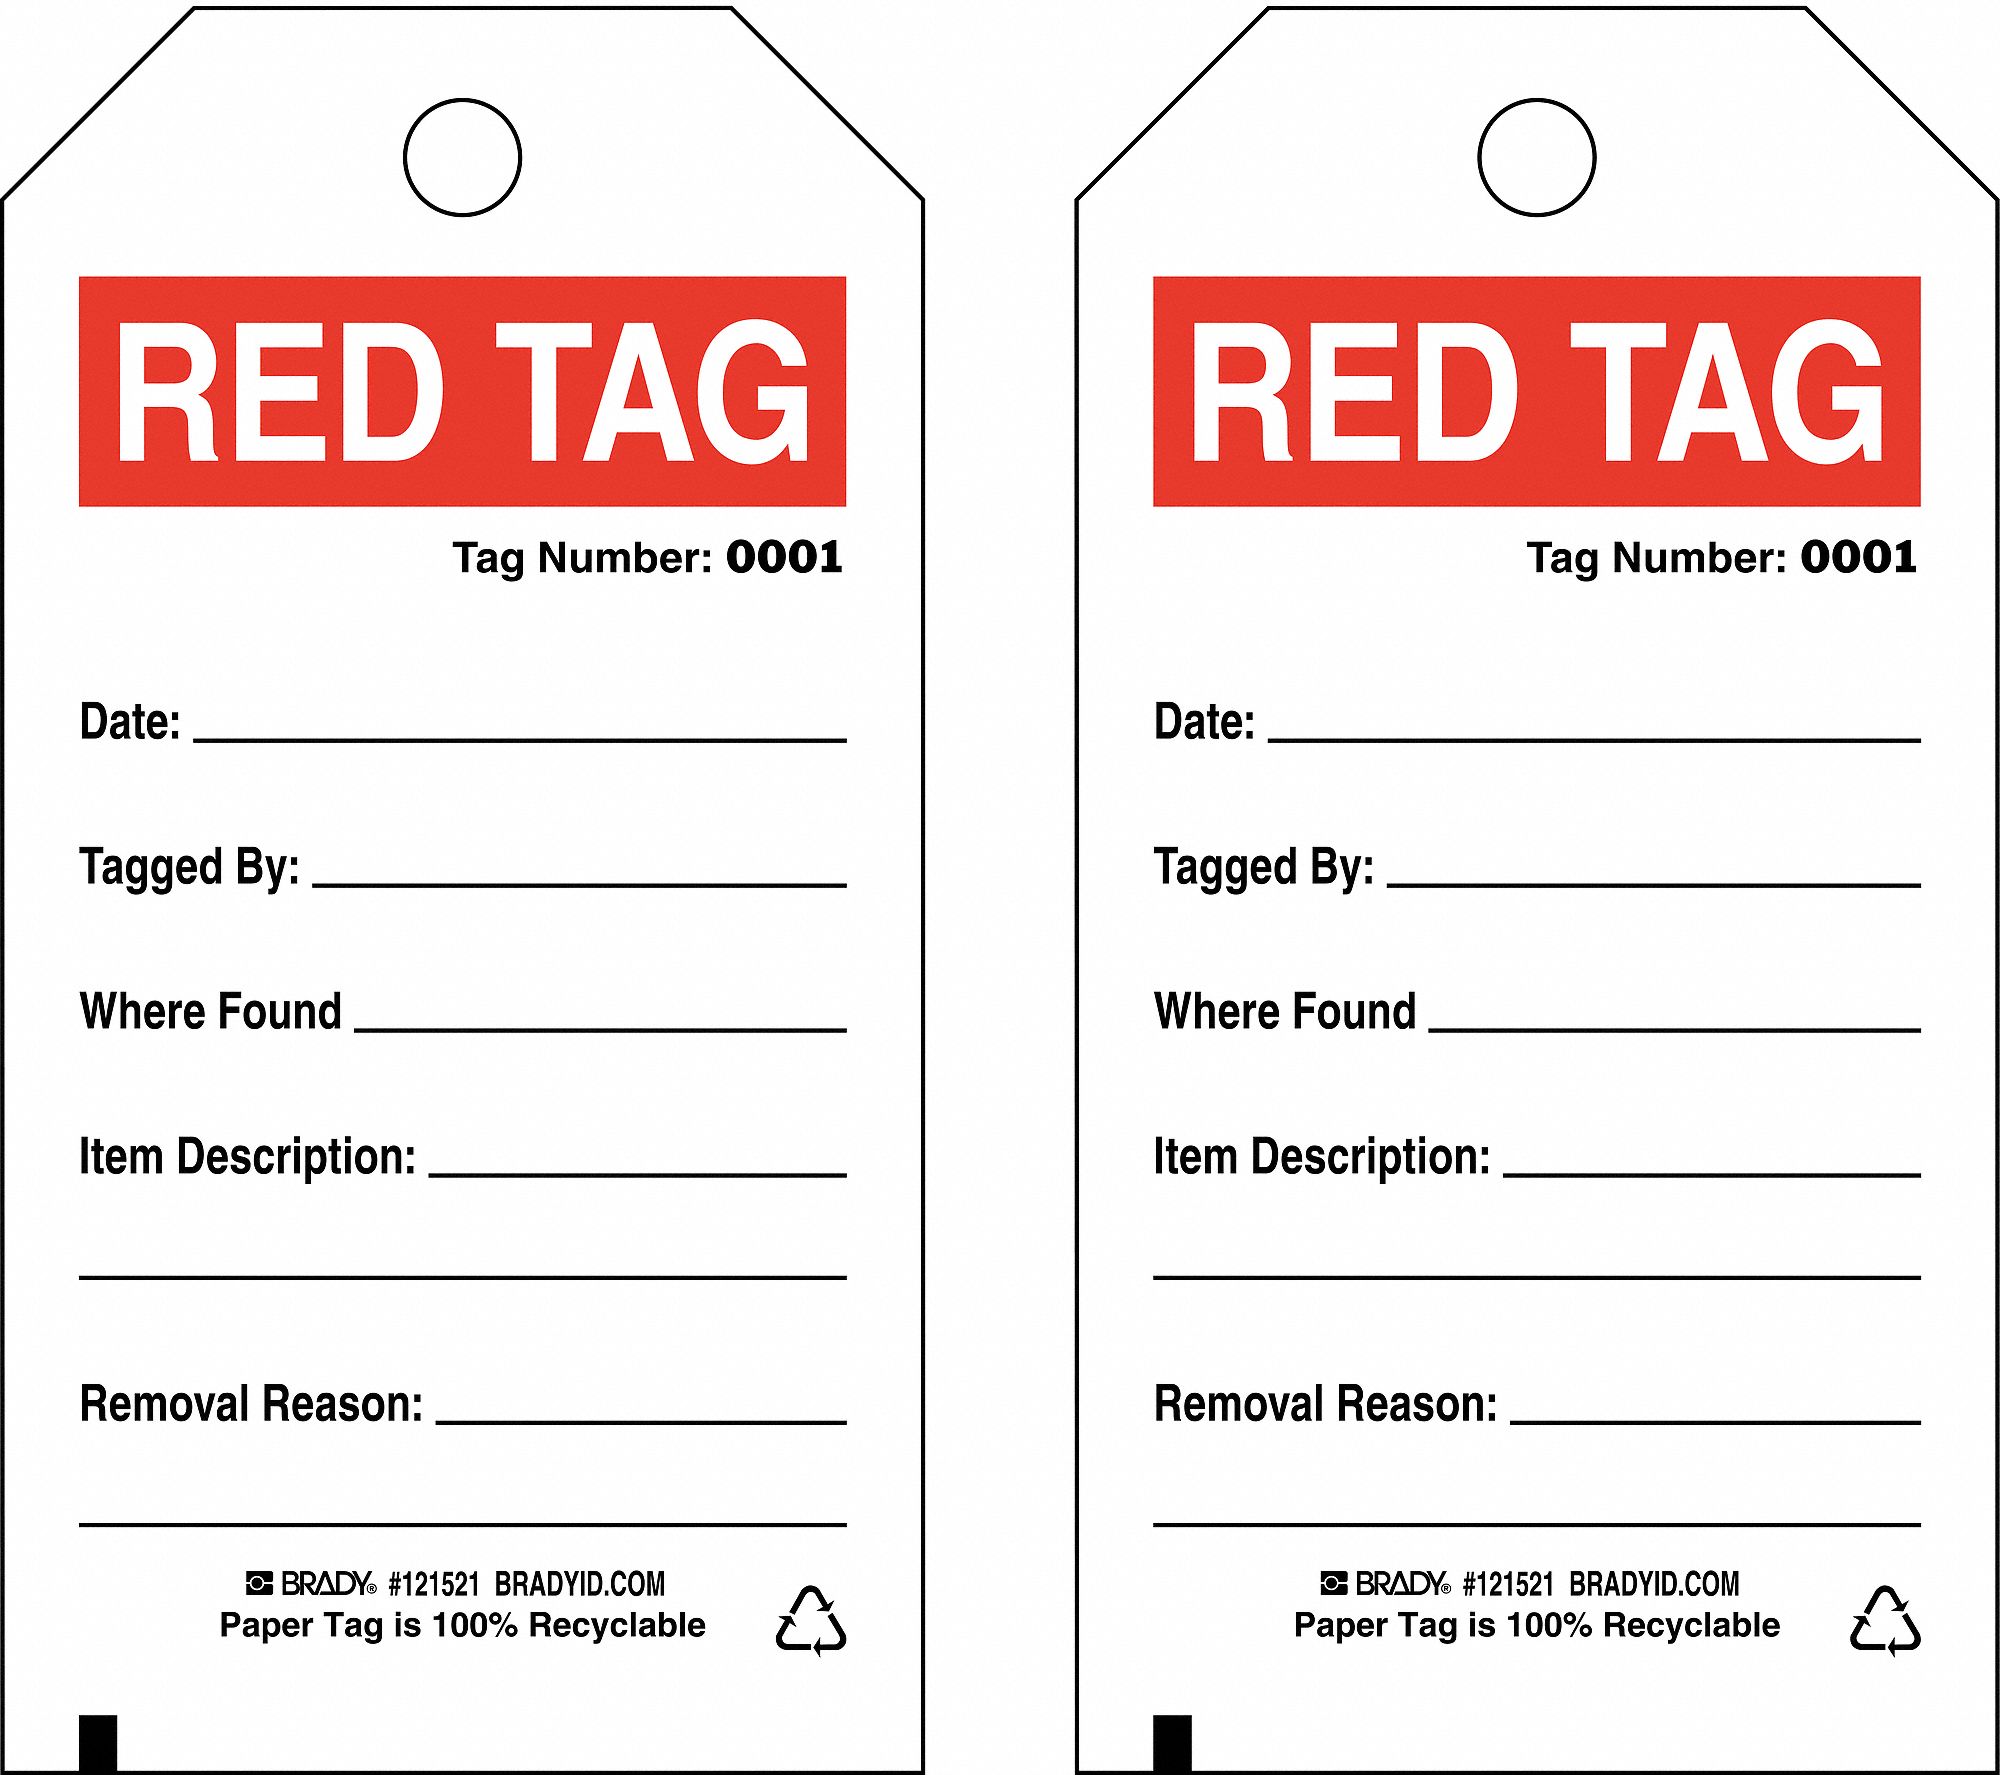 BRADY 5S Red Tag, Sign Legend Date Tagged By Item Description